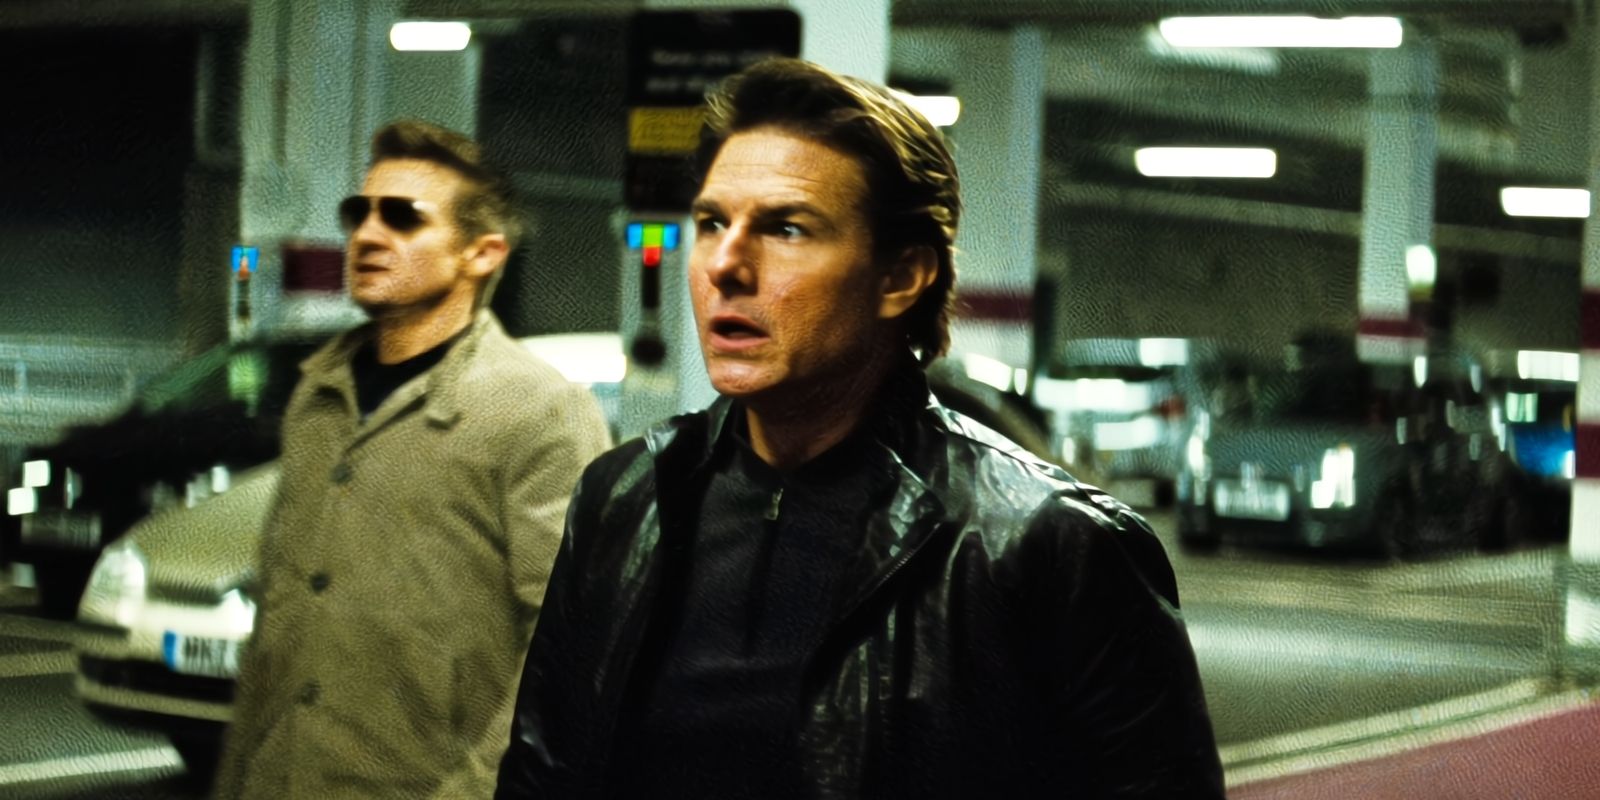 Tom Cruise as Ethan Hunt and Jeremy Renner as Brandt in Mission Impossible Rogue Nation